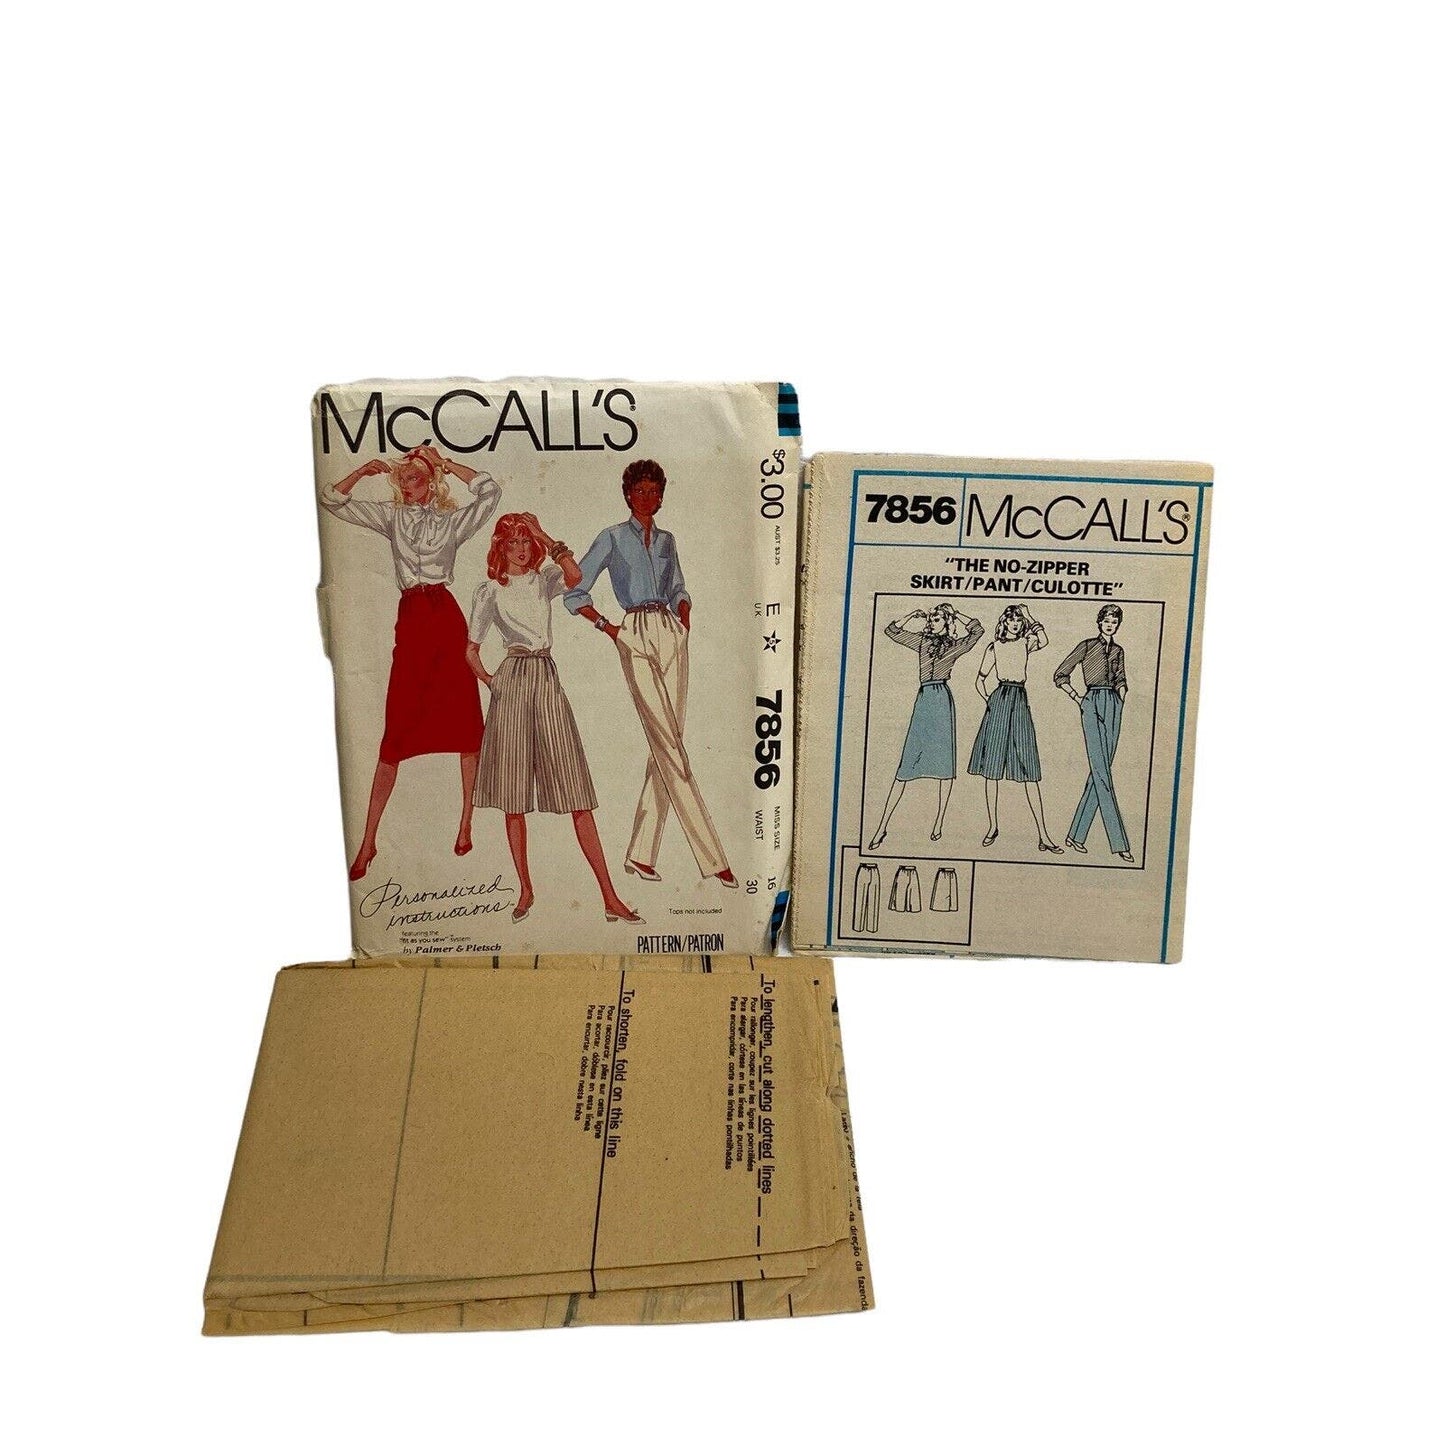 Mccalls 7856 Skirt Pants Culottes Vintage 1982 Sewing Pattern Size 16